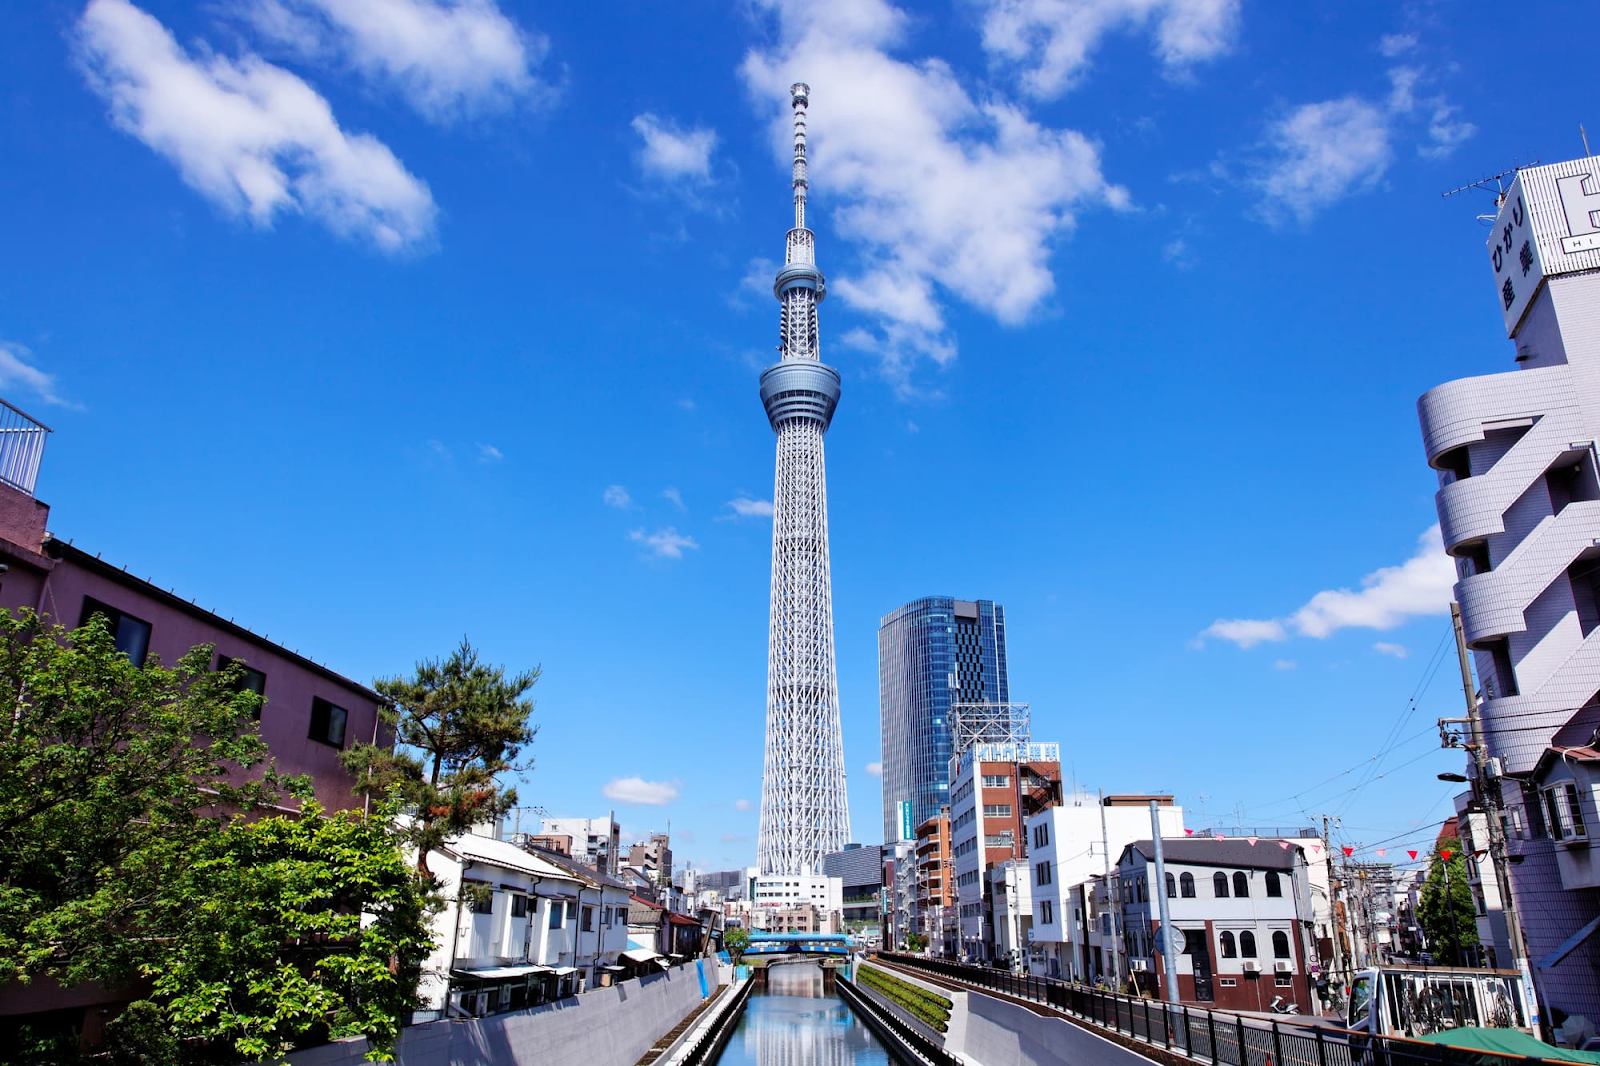  View of The Tokyo Skytree, Japan